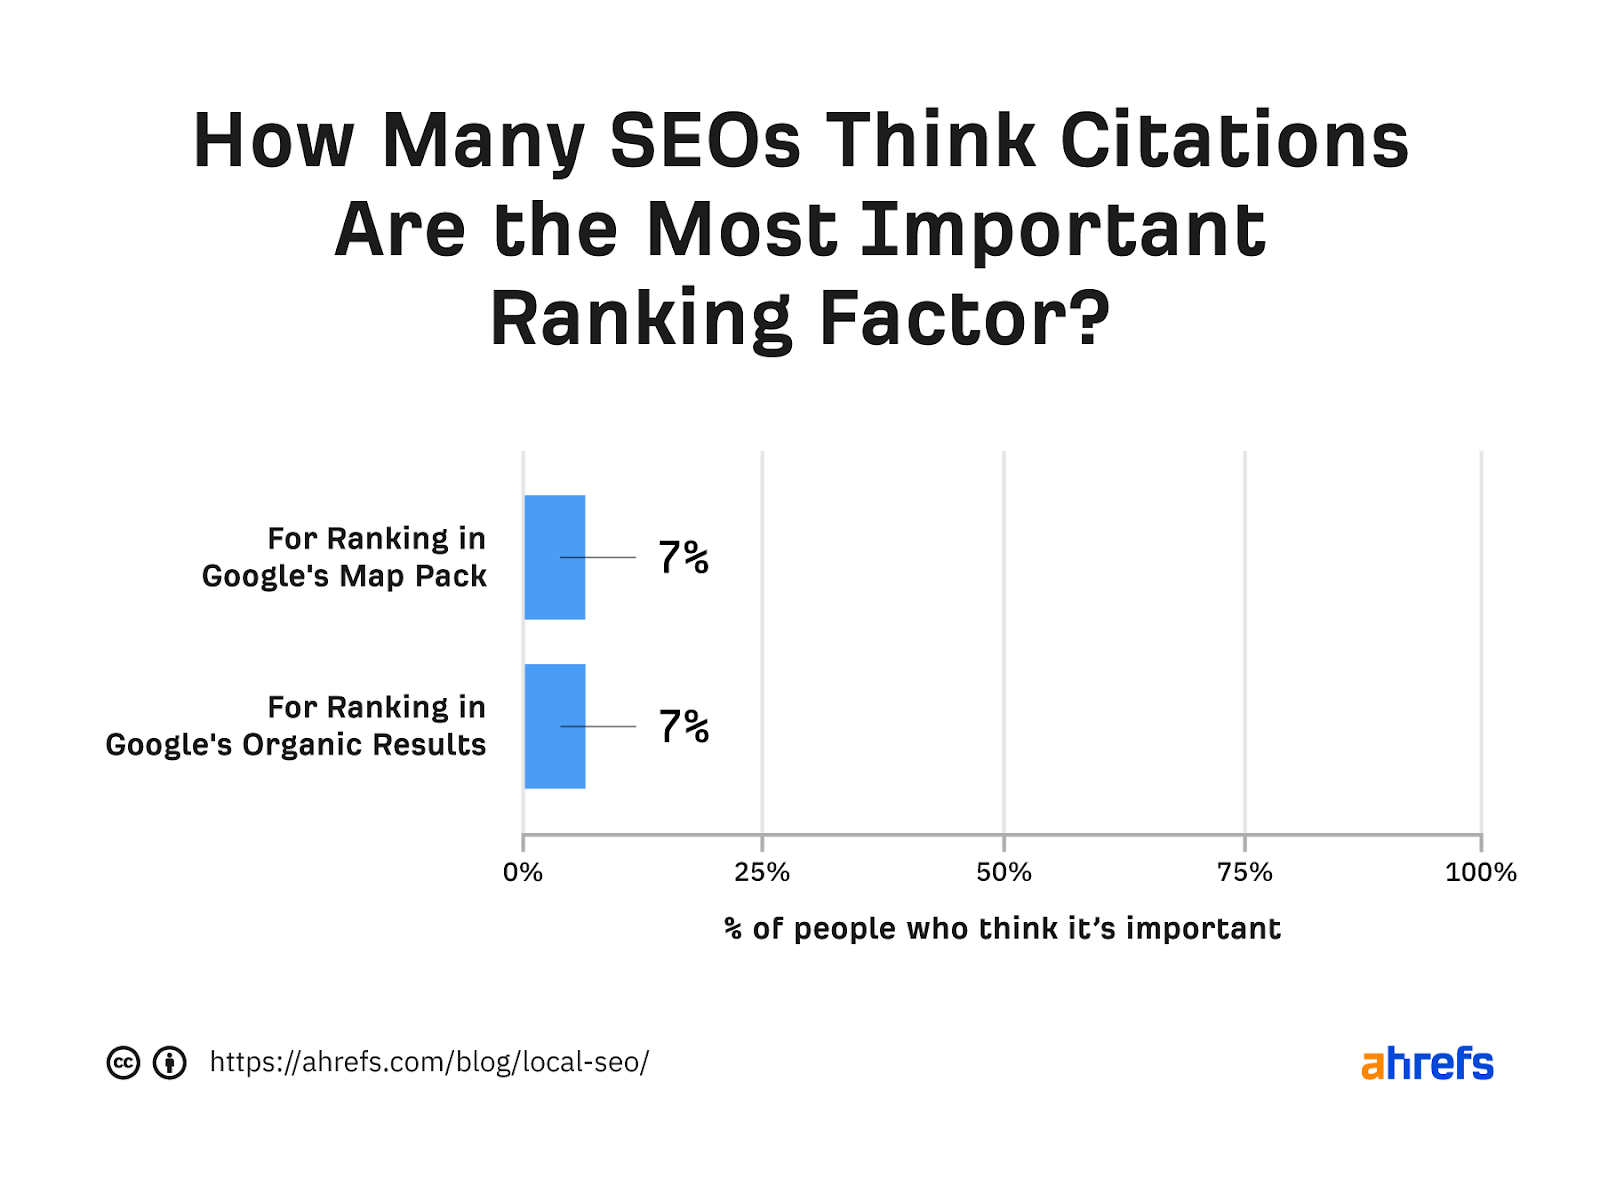 Bar graph showing percentage of SEOs who think citations are most important ranking factor for 